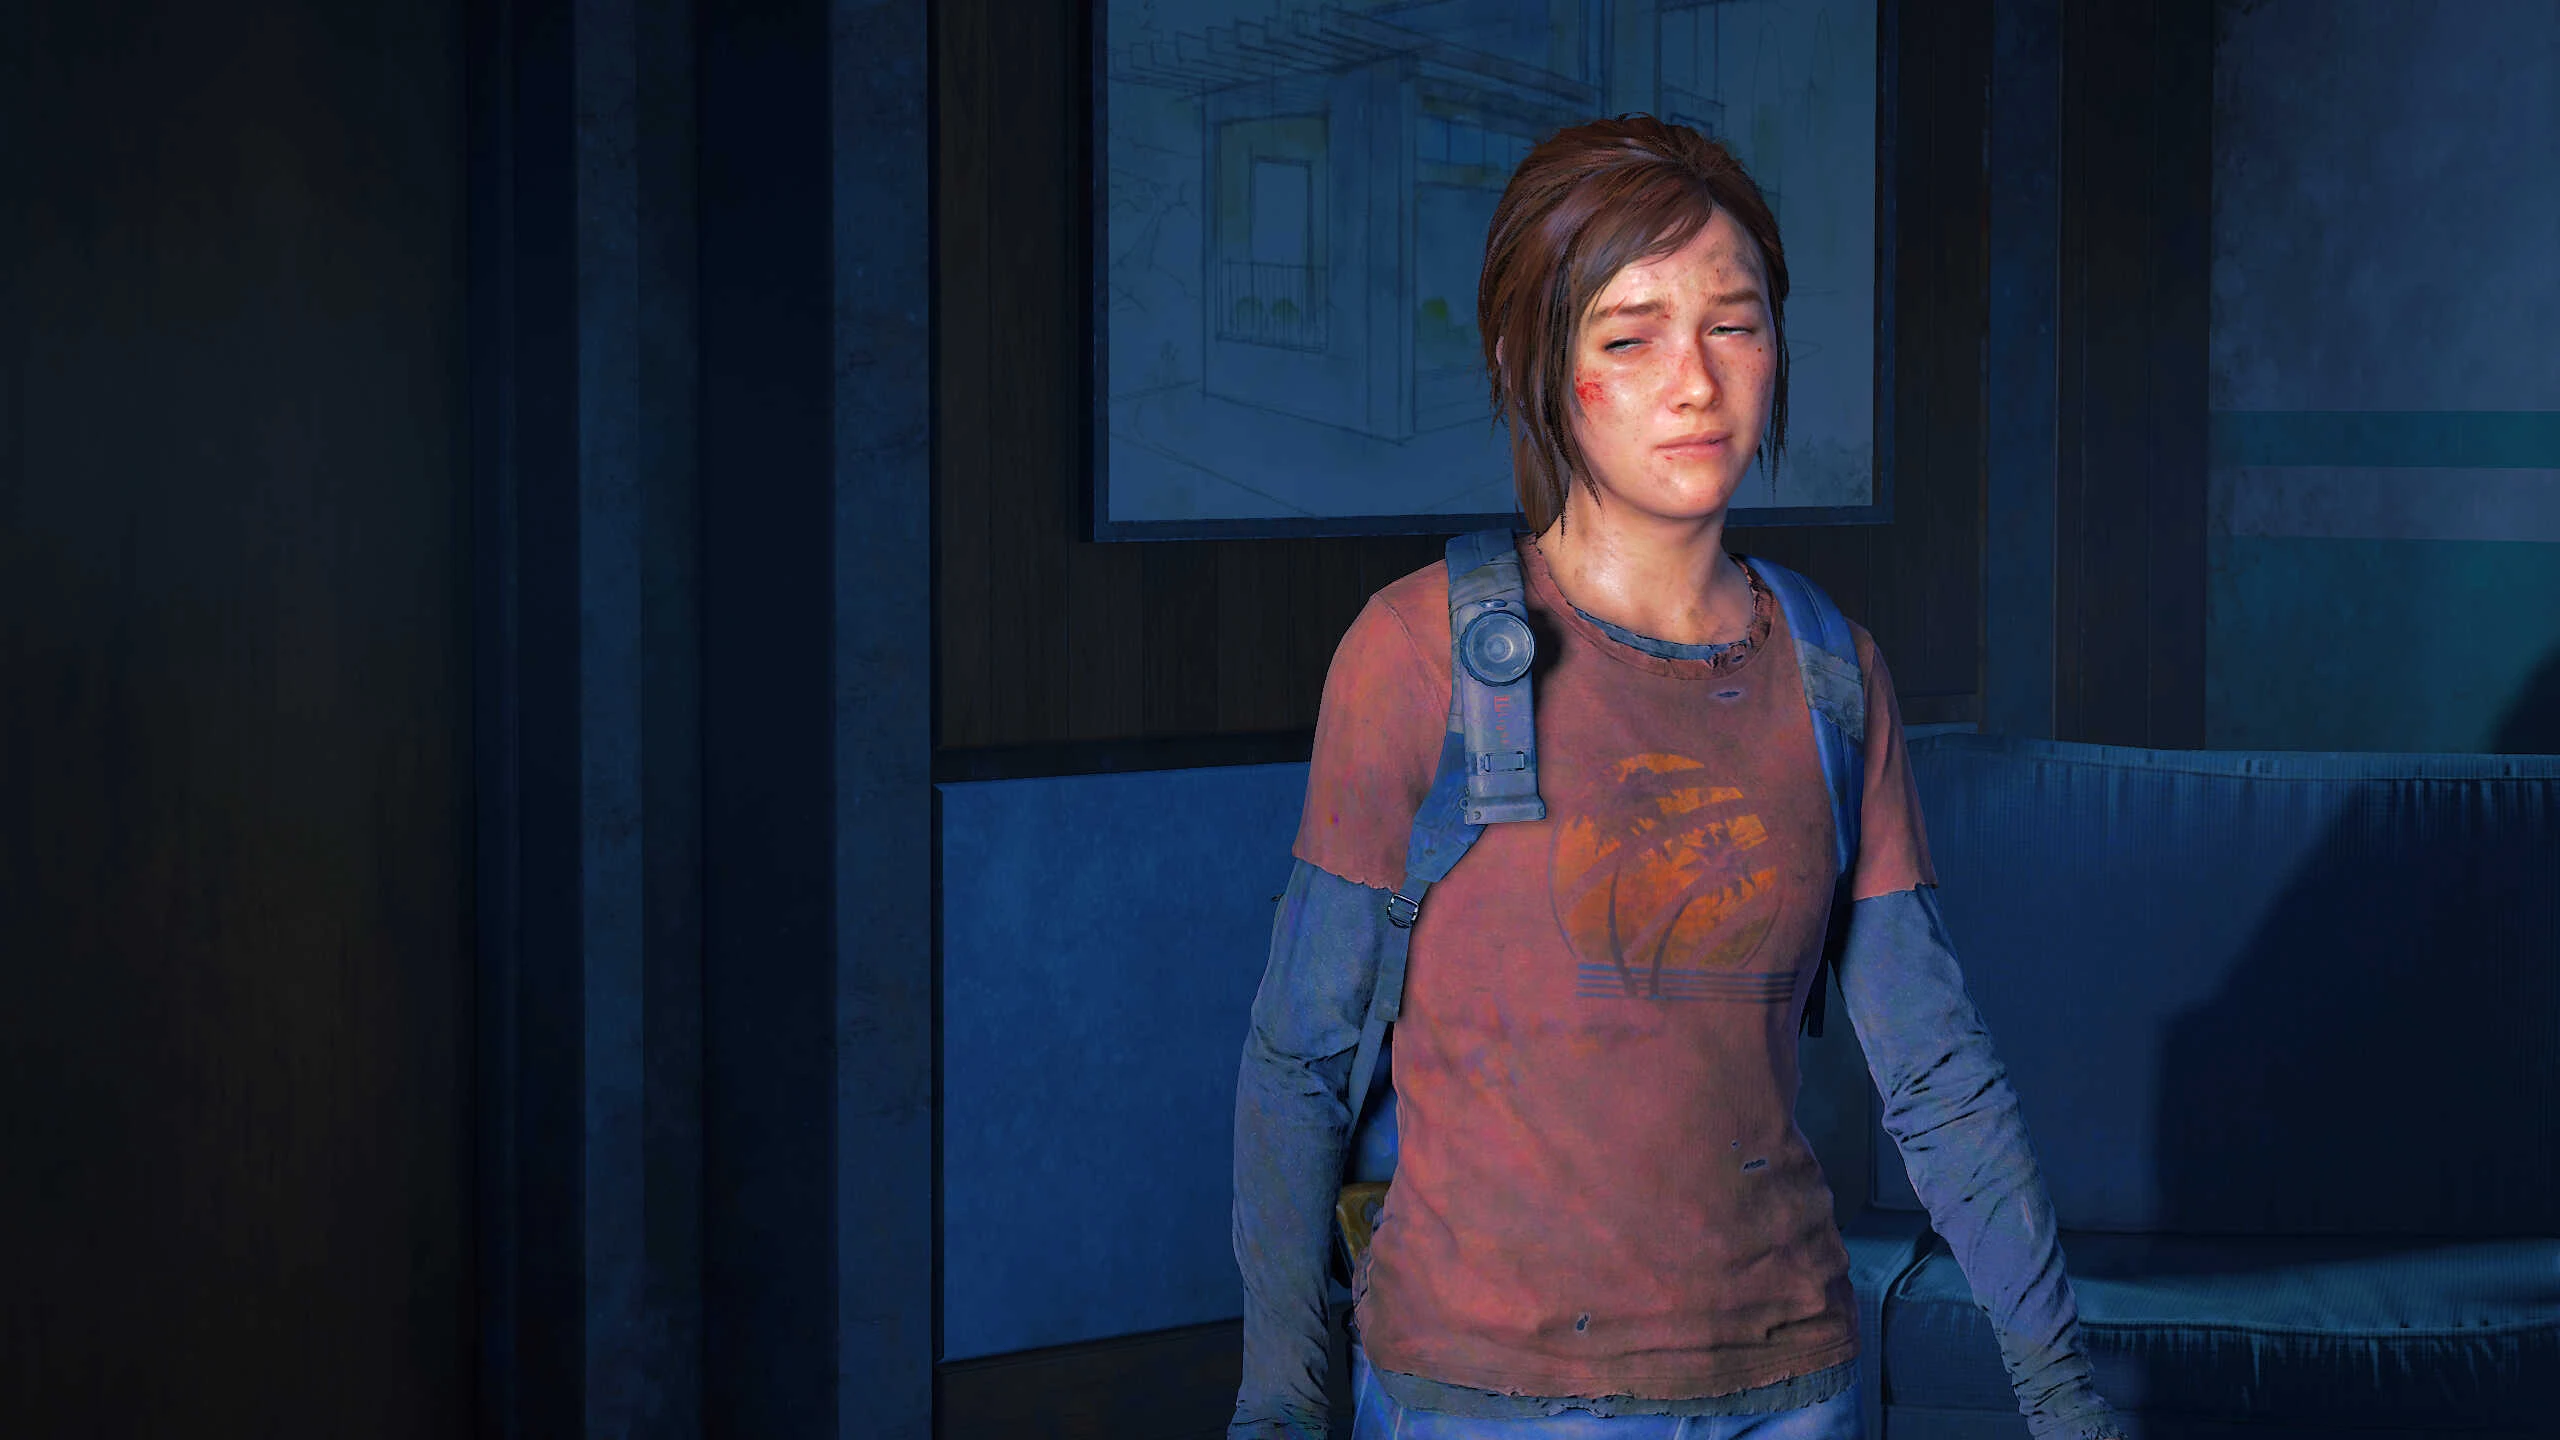 Playable Ellie at The Last Of Us Part I Nexus - Mods and community